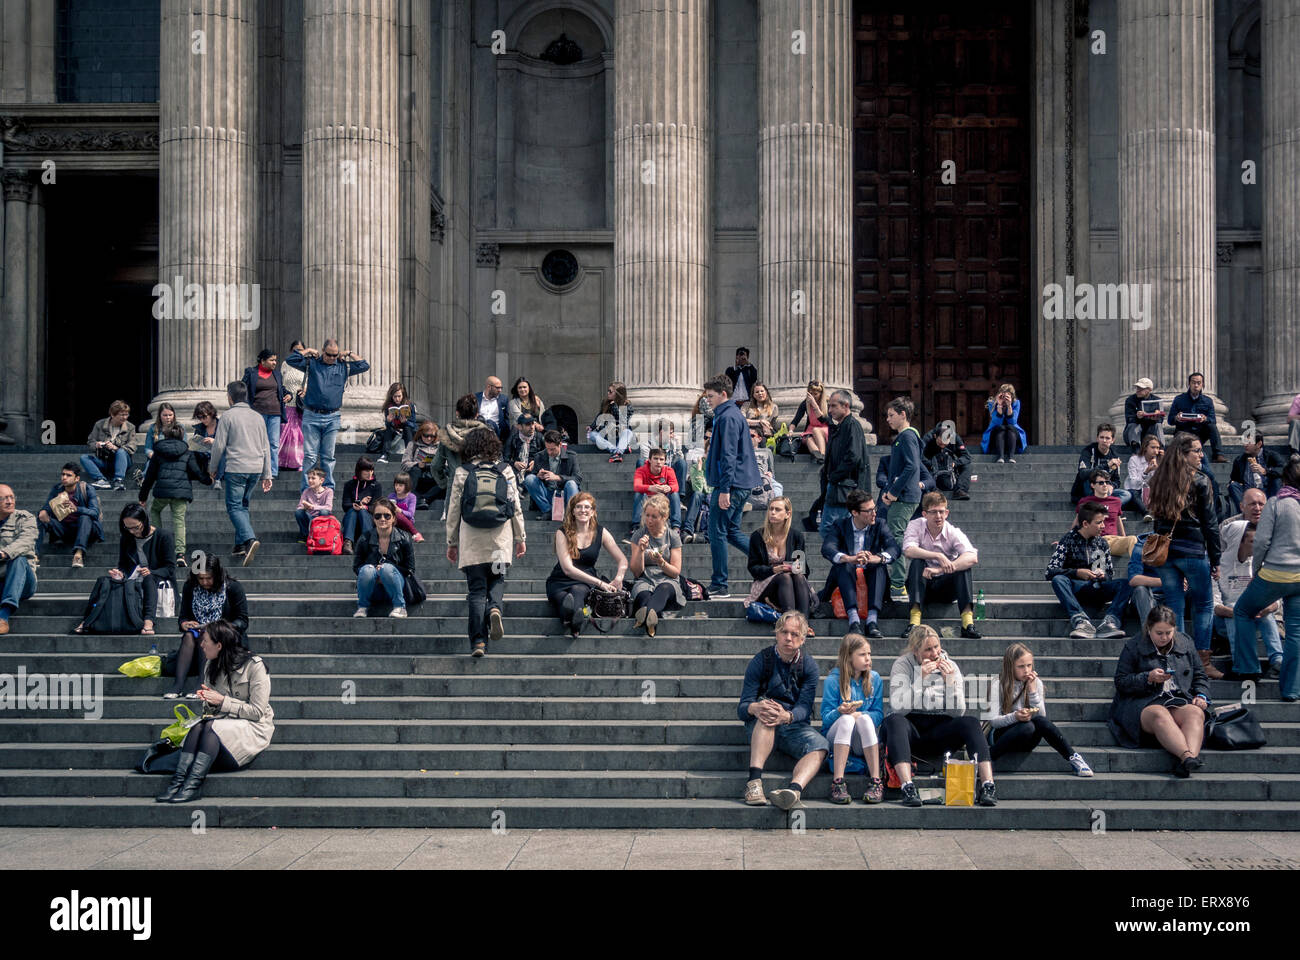 Tourists taking a break sitting on steps outside St Paul's Cathedral, London, UK. Stock Photo